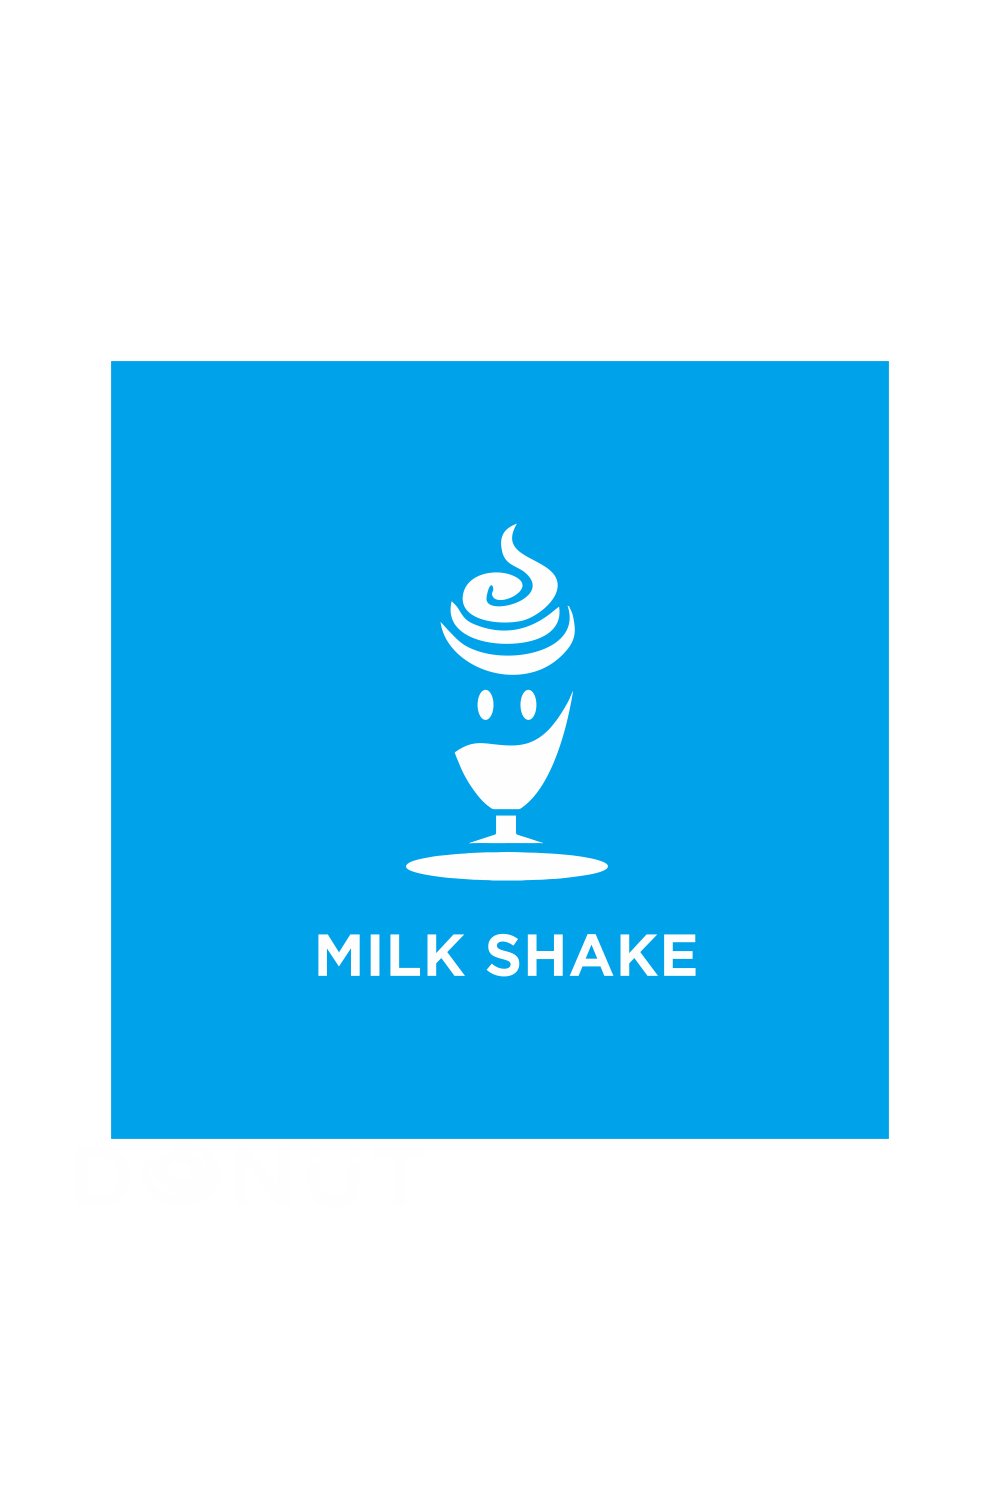 Milkshake vector illustration with glass and blue white shades pinterest preview image.